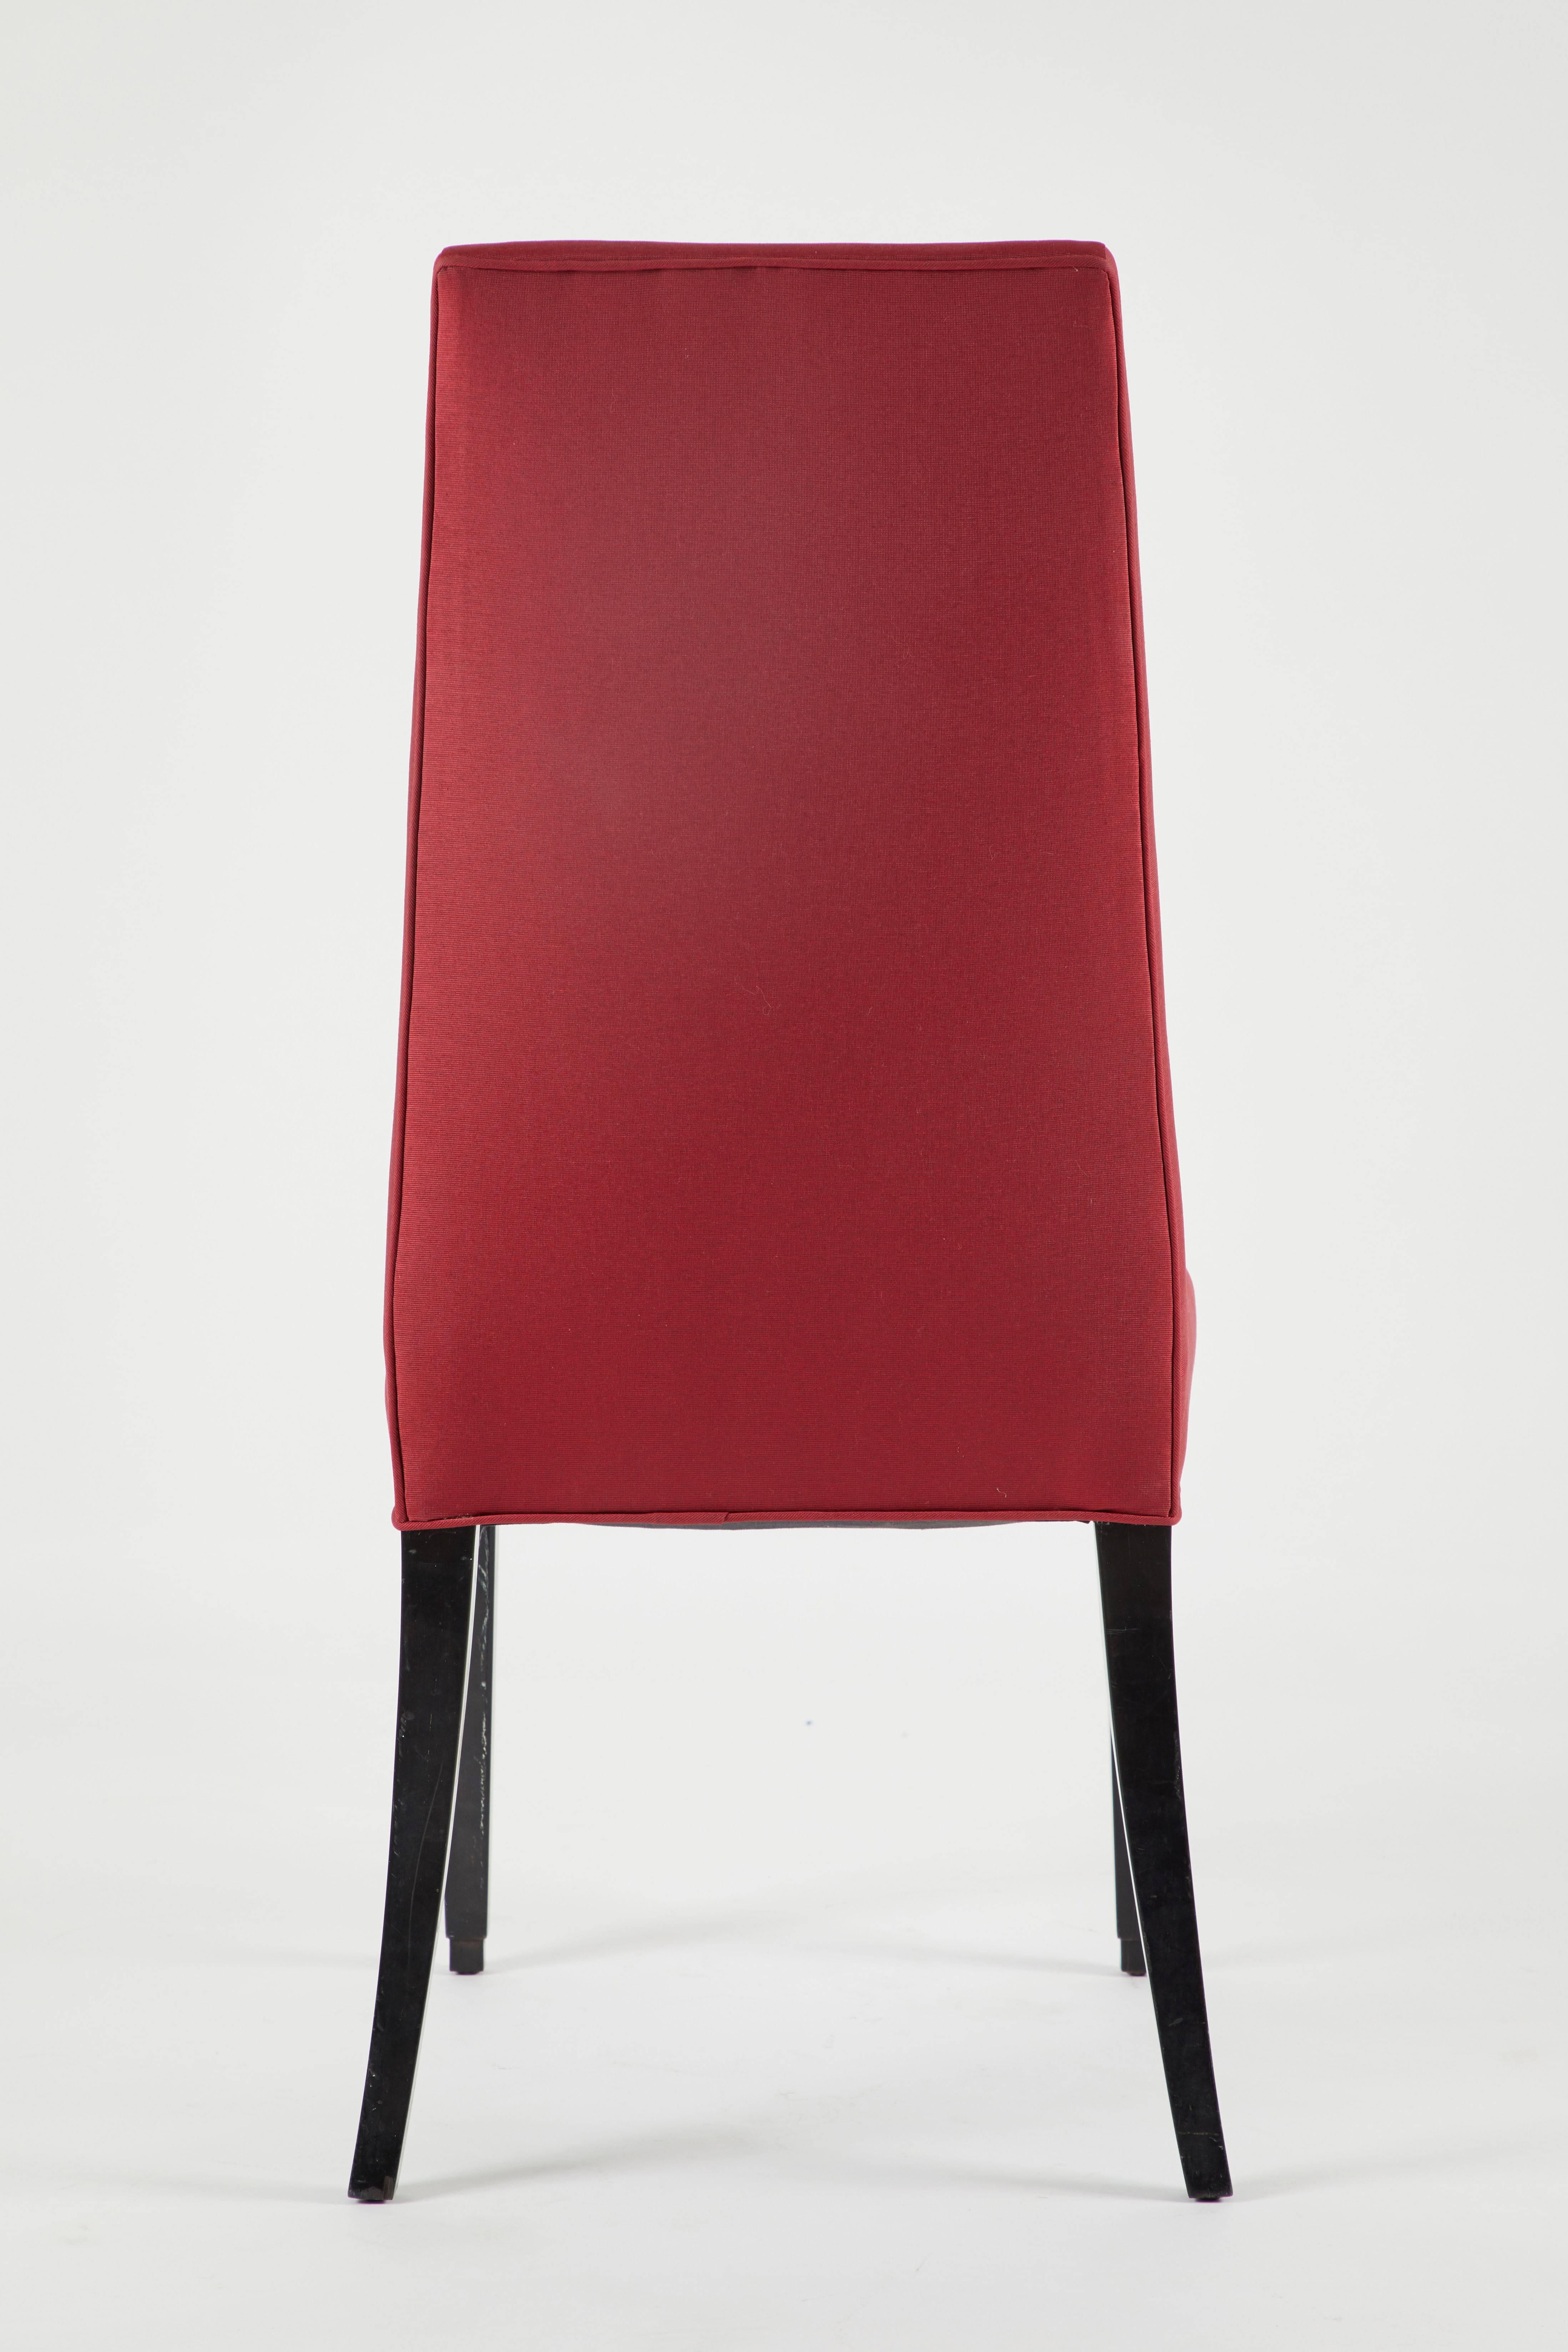 American Set of 12 Red Dining Chairs For Sale